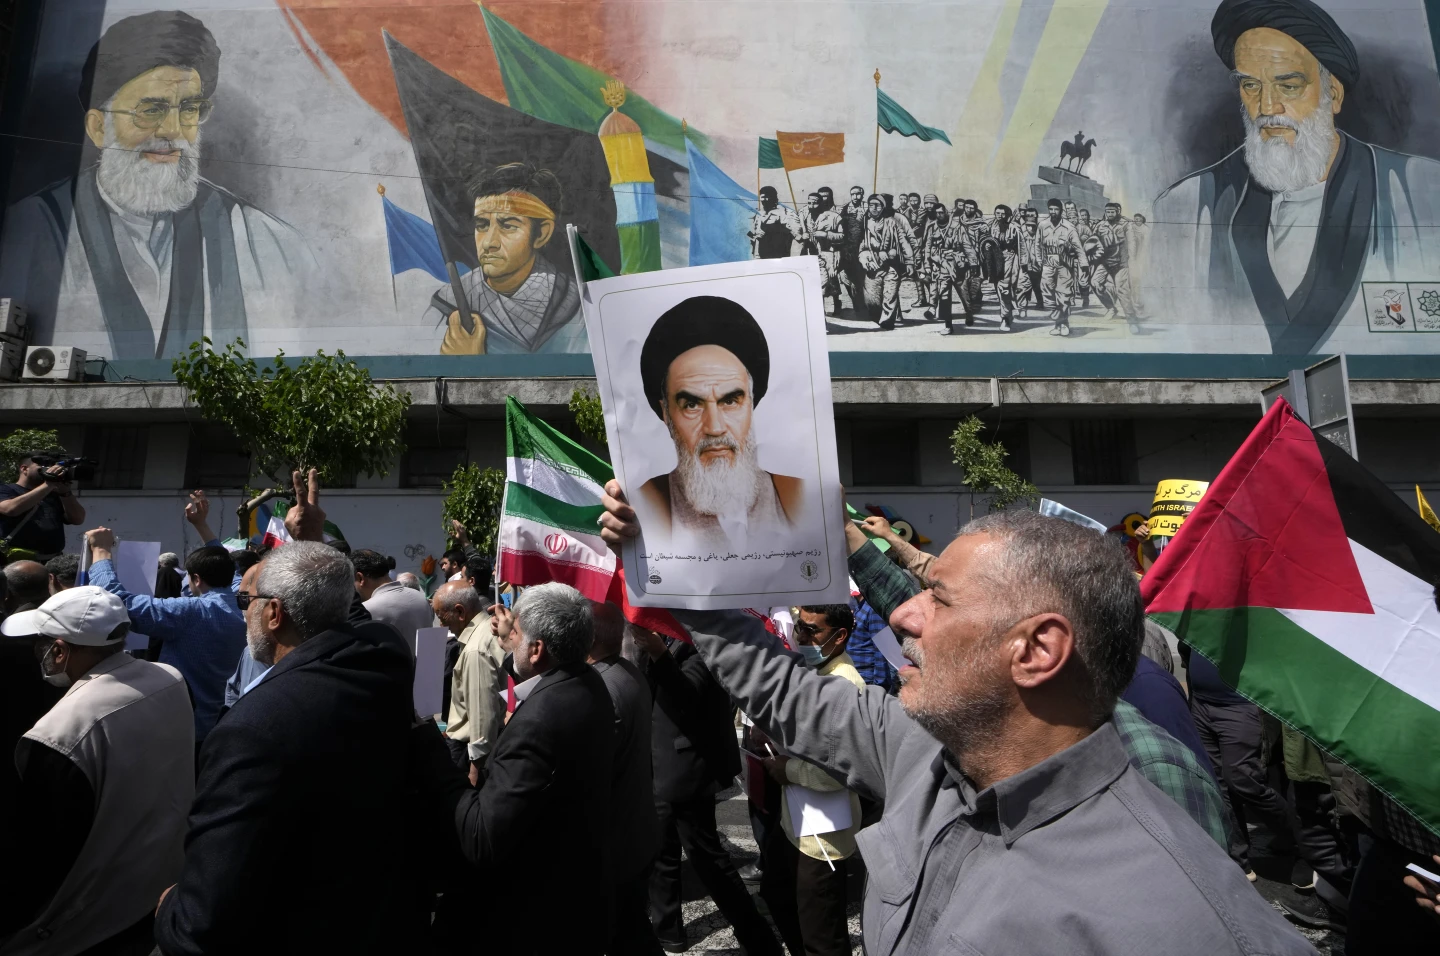 Israel and Iran's apparent strikes and counterstrikes give new insights into both militaries